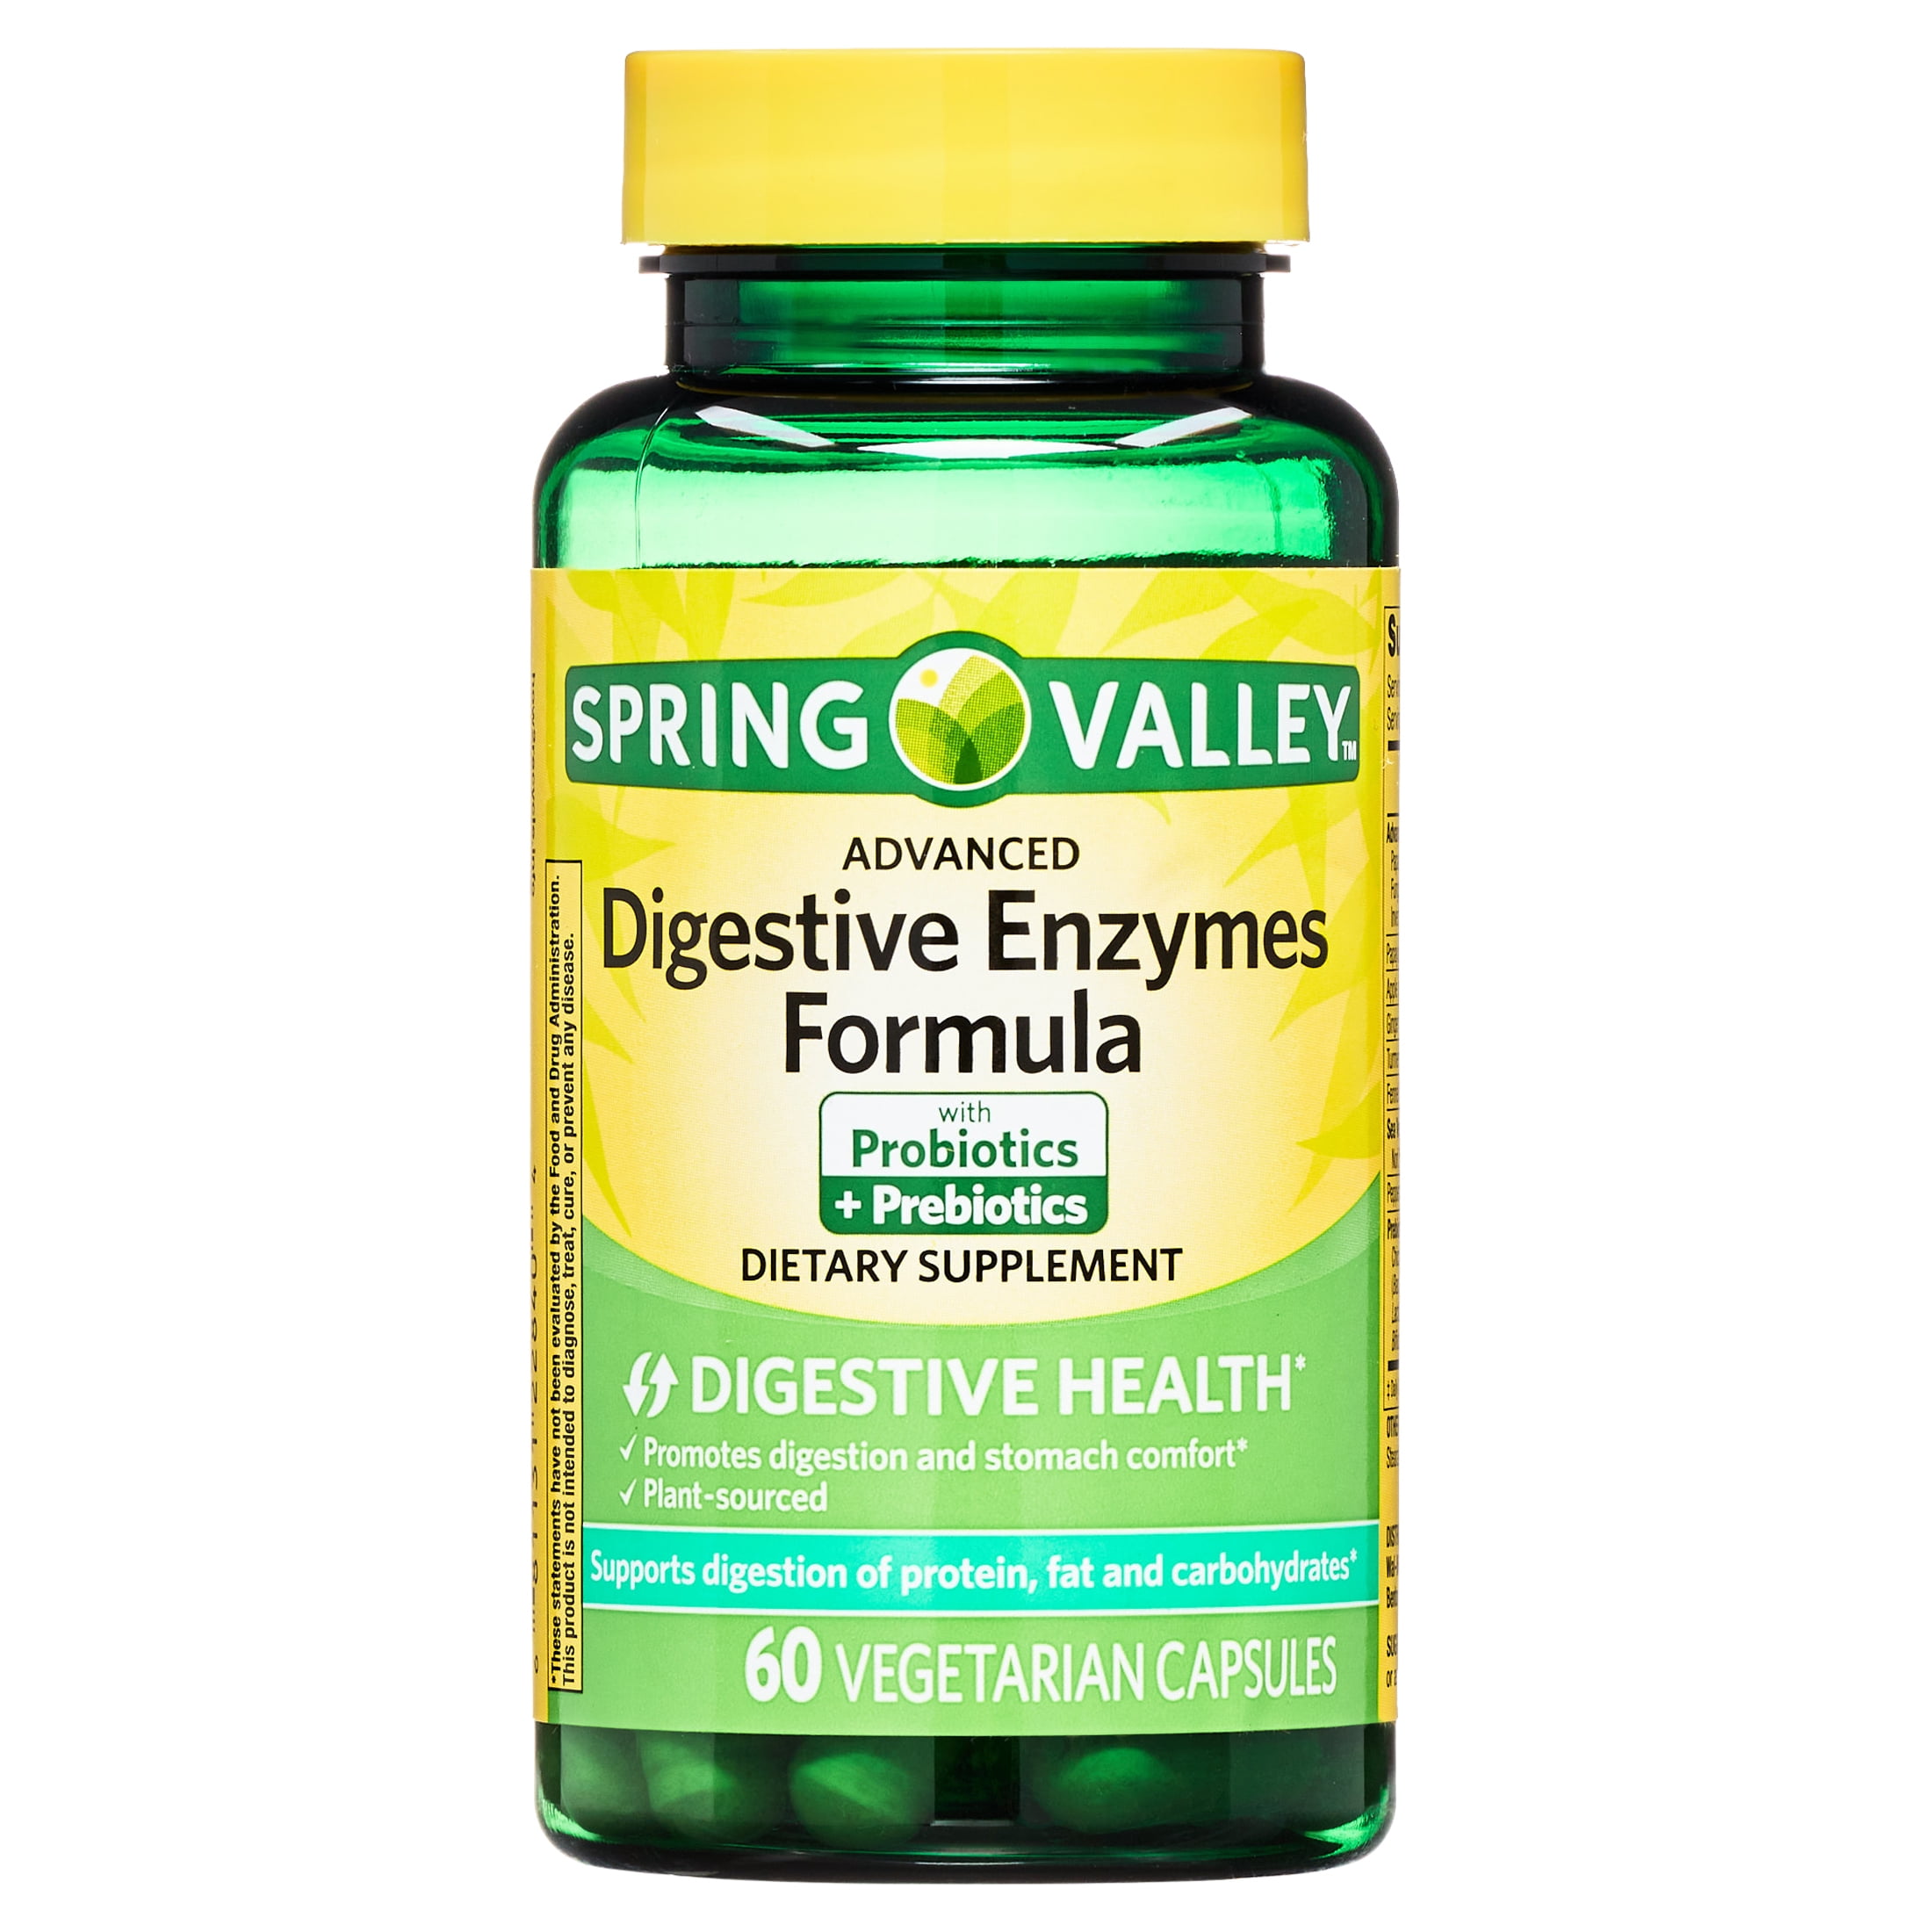 Digestive enzyme supplements